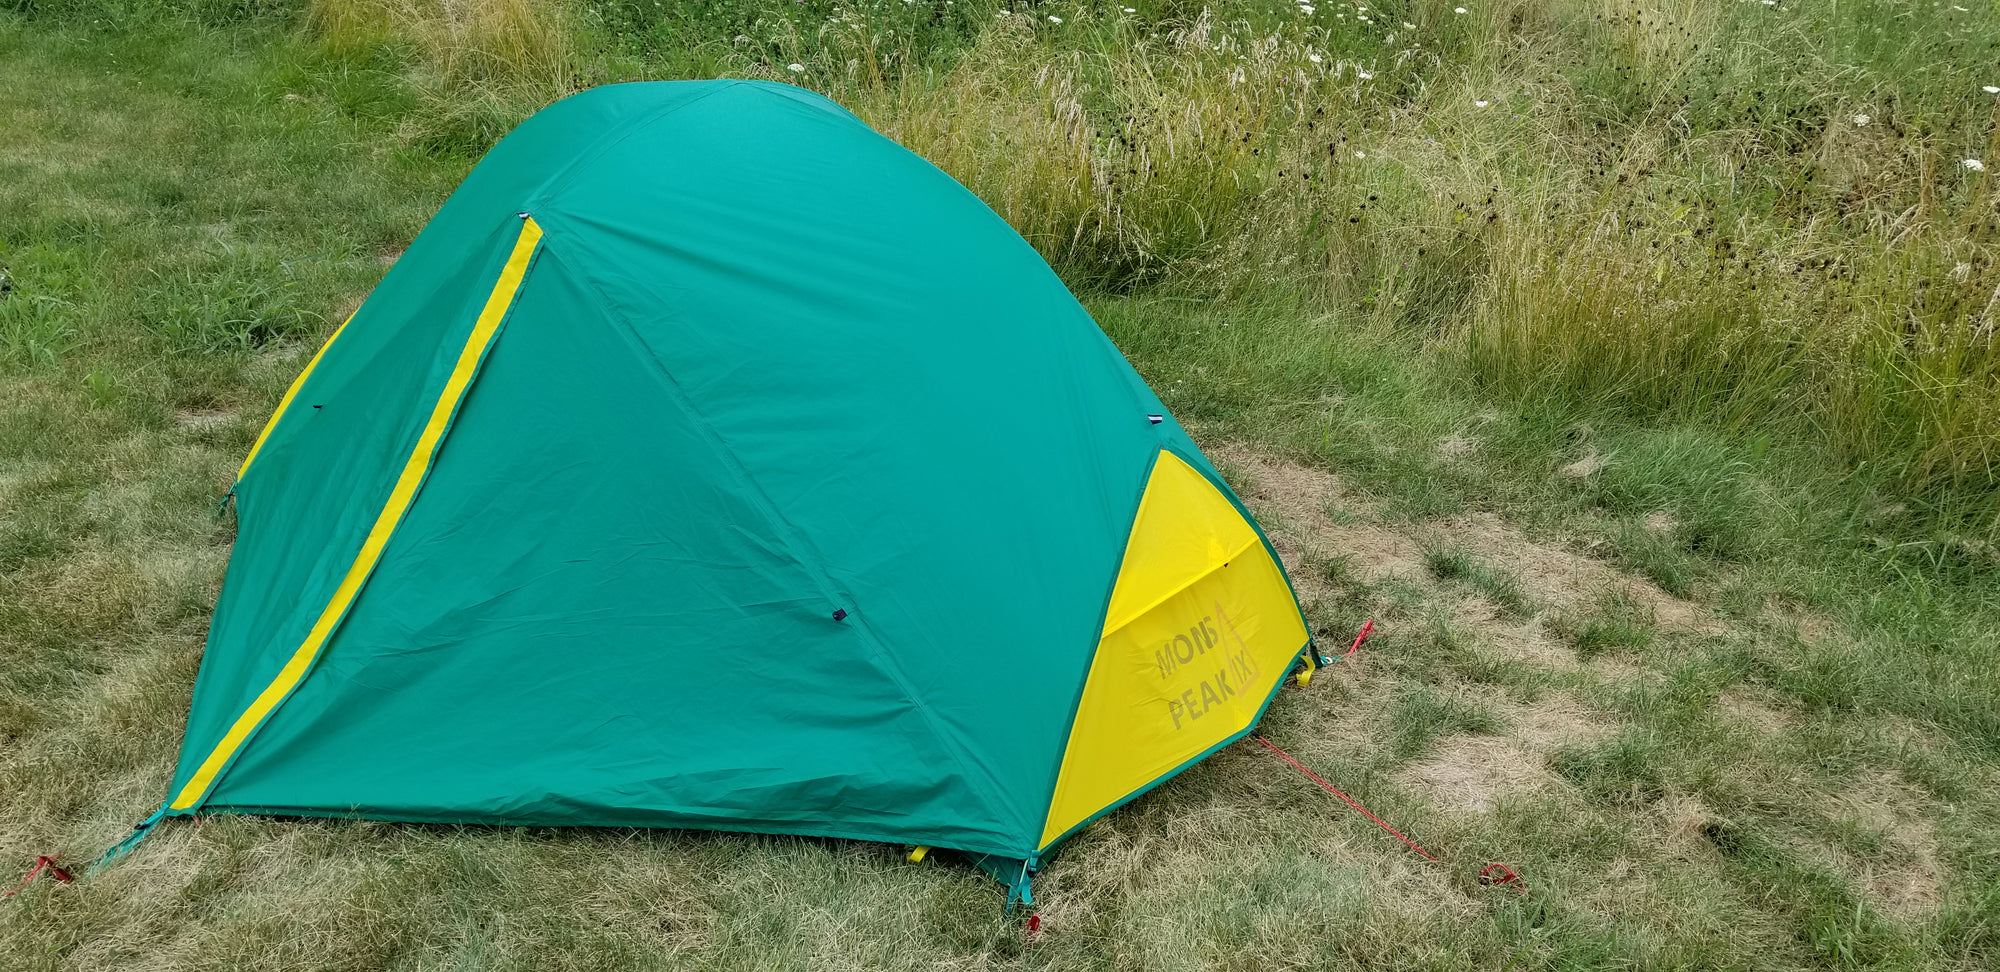 Trail 21+ Triple Tough - 2 Person and 1+ Person 2-in-1 Backpacking Tent (1P+ only)